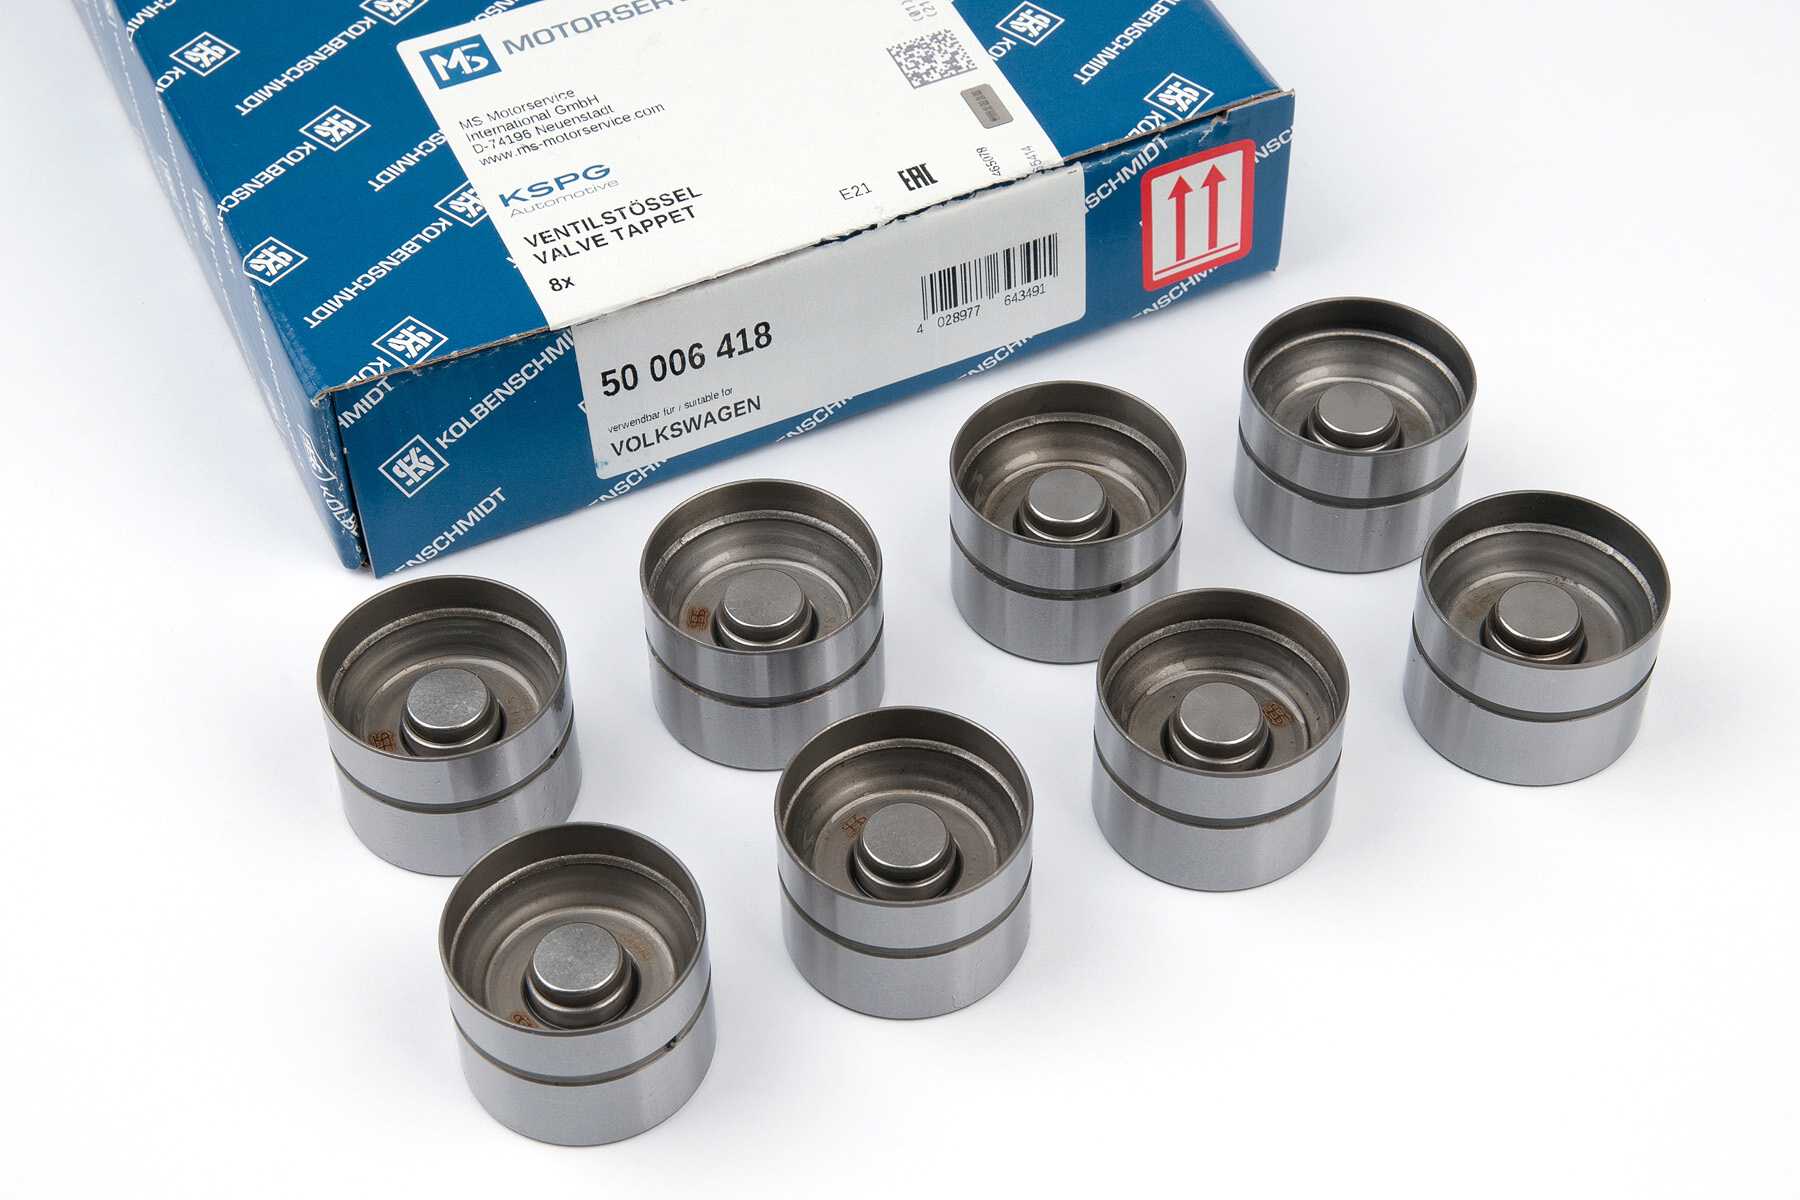 Pour Skoda Fabia Roomster 1.2 12 V Hydraulic tappets Lifters Set 12 pcs.